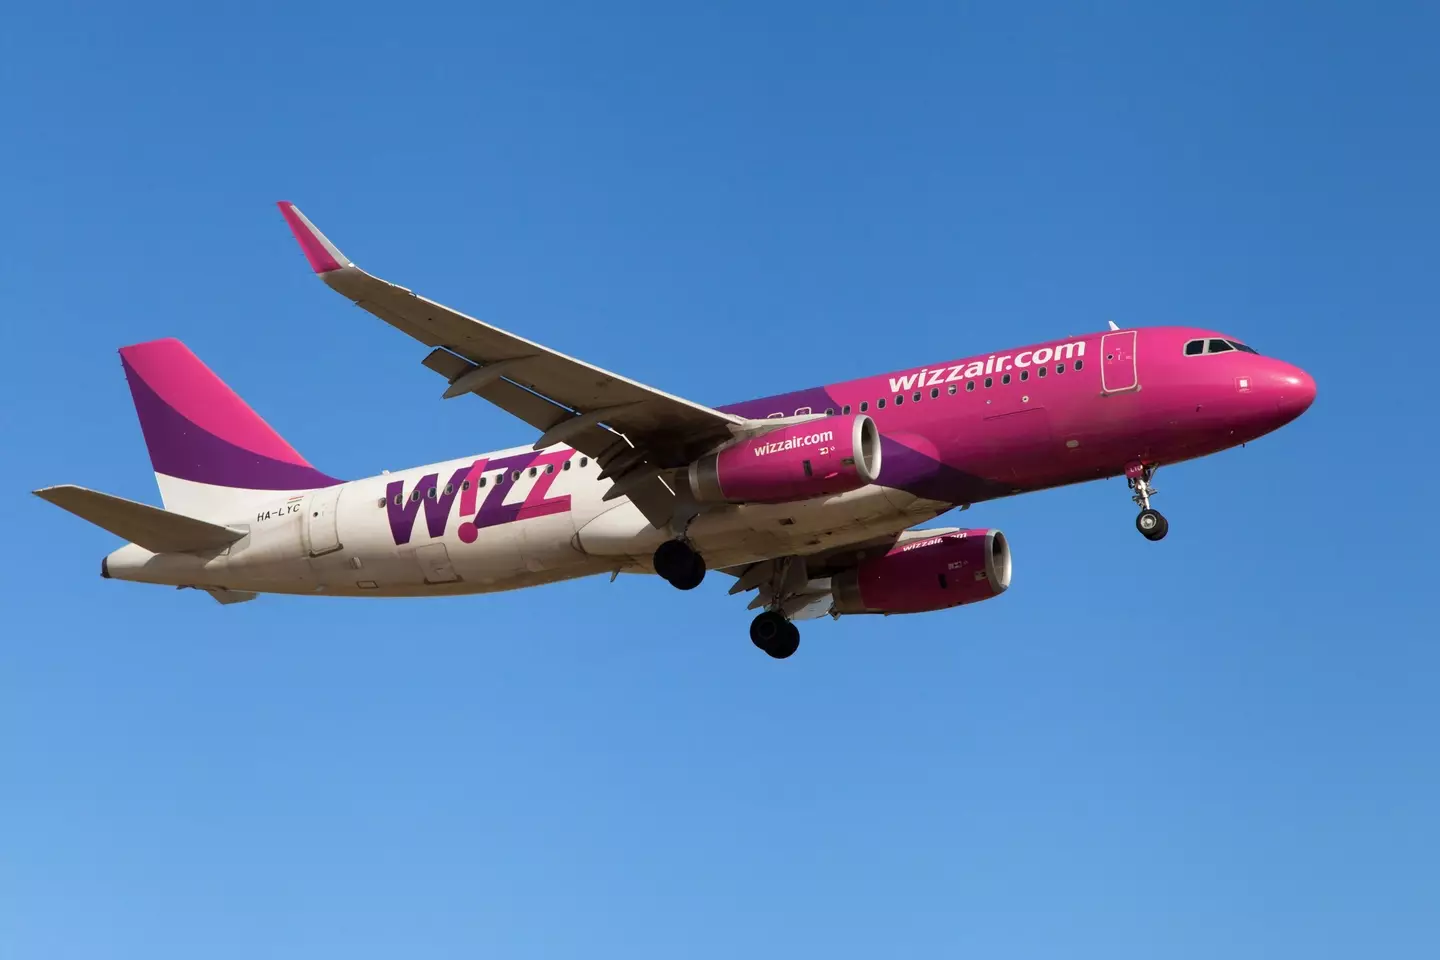 WizzAir came bottom of the Which? survey in determining the worst airline in the UK.